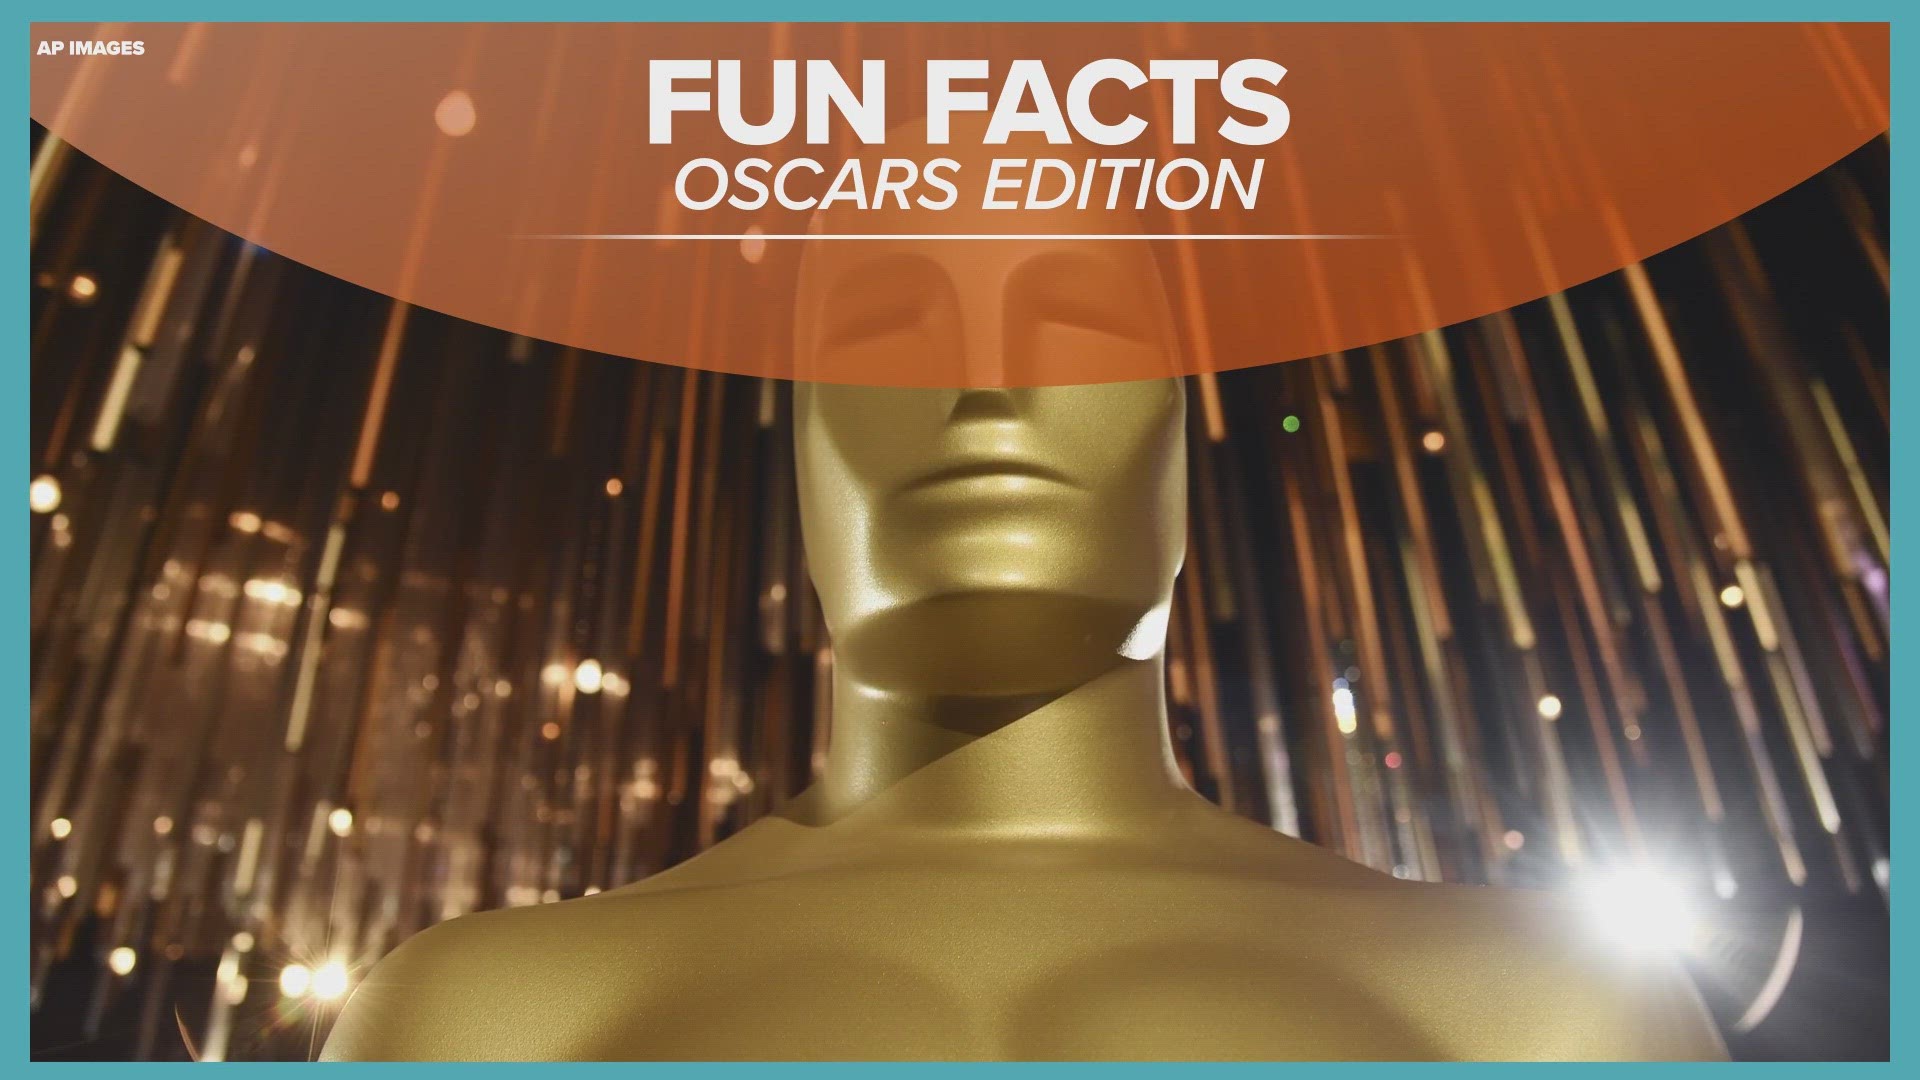 Brush up your Oscars knowledge with these fun facts ahead of the Academy Awards.